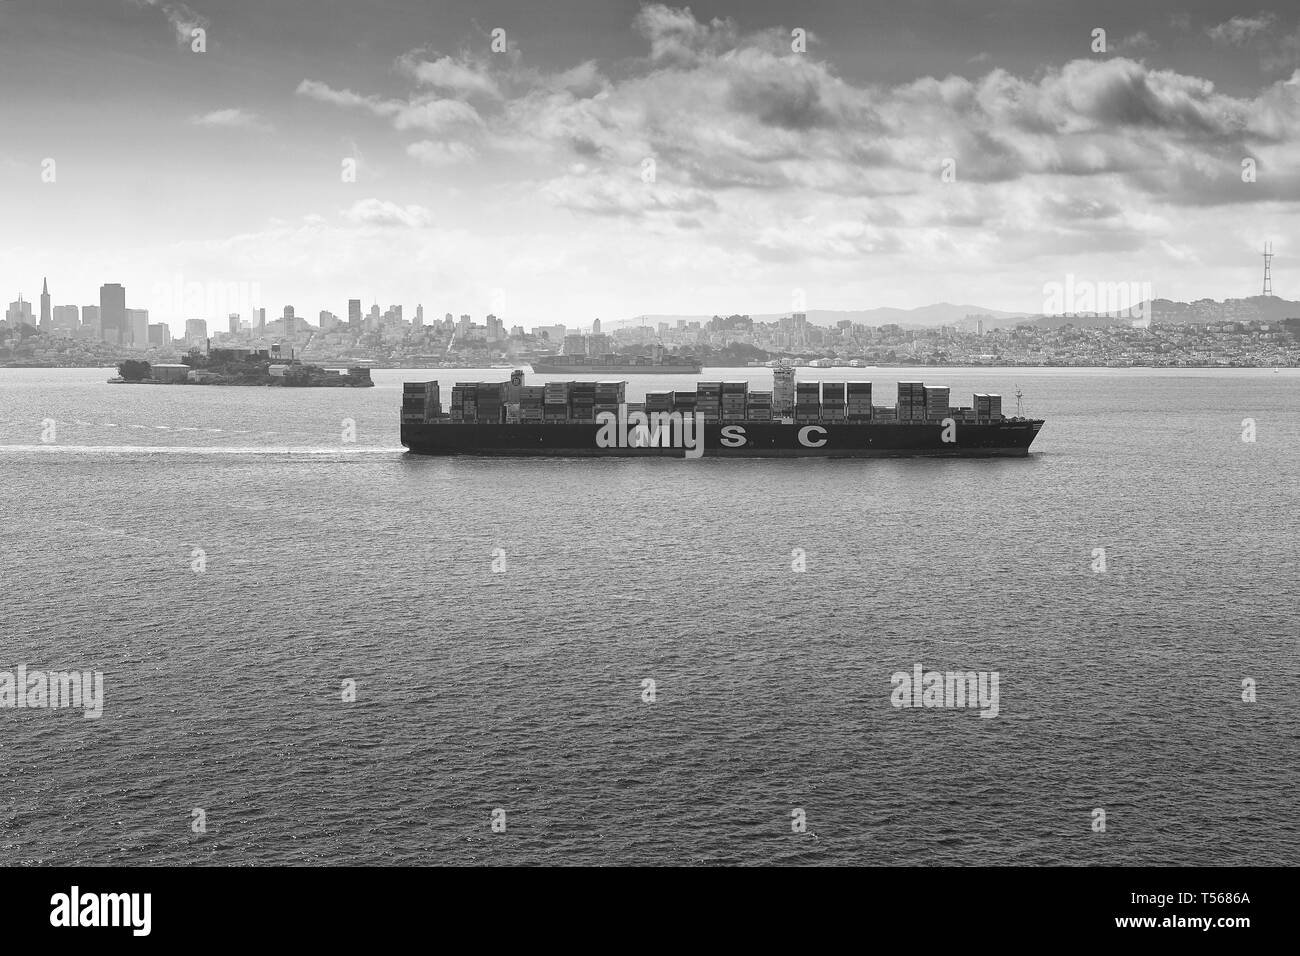 Moody Black and White Photo of the Container Ship, MSC ARIANE, dampfend durch San Francisco Bay, Alcatraz links und hinten. USA. Stockfoto